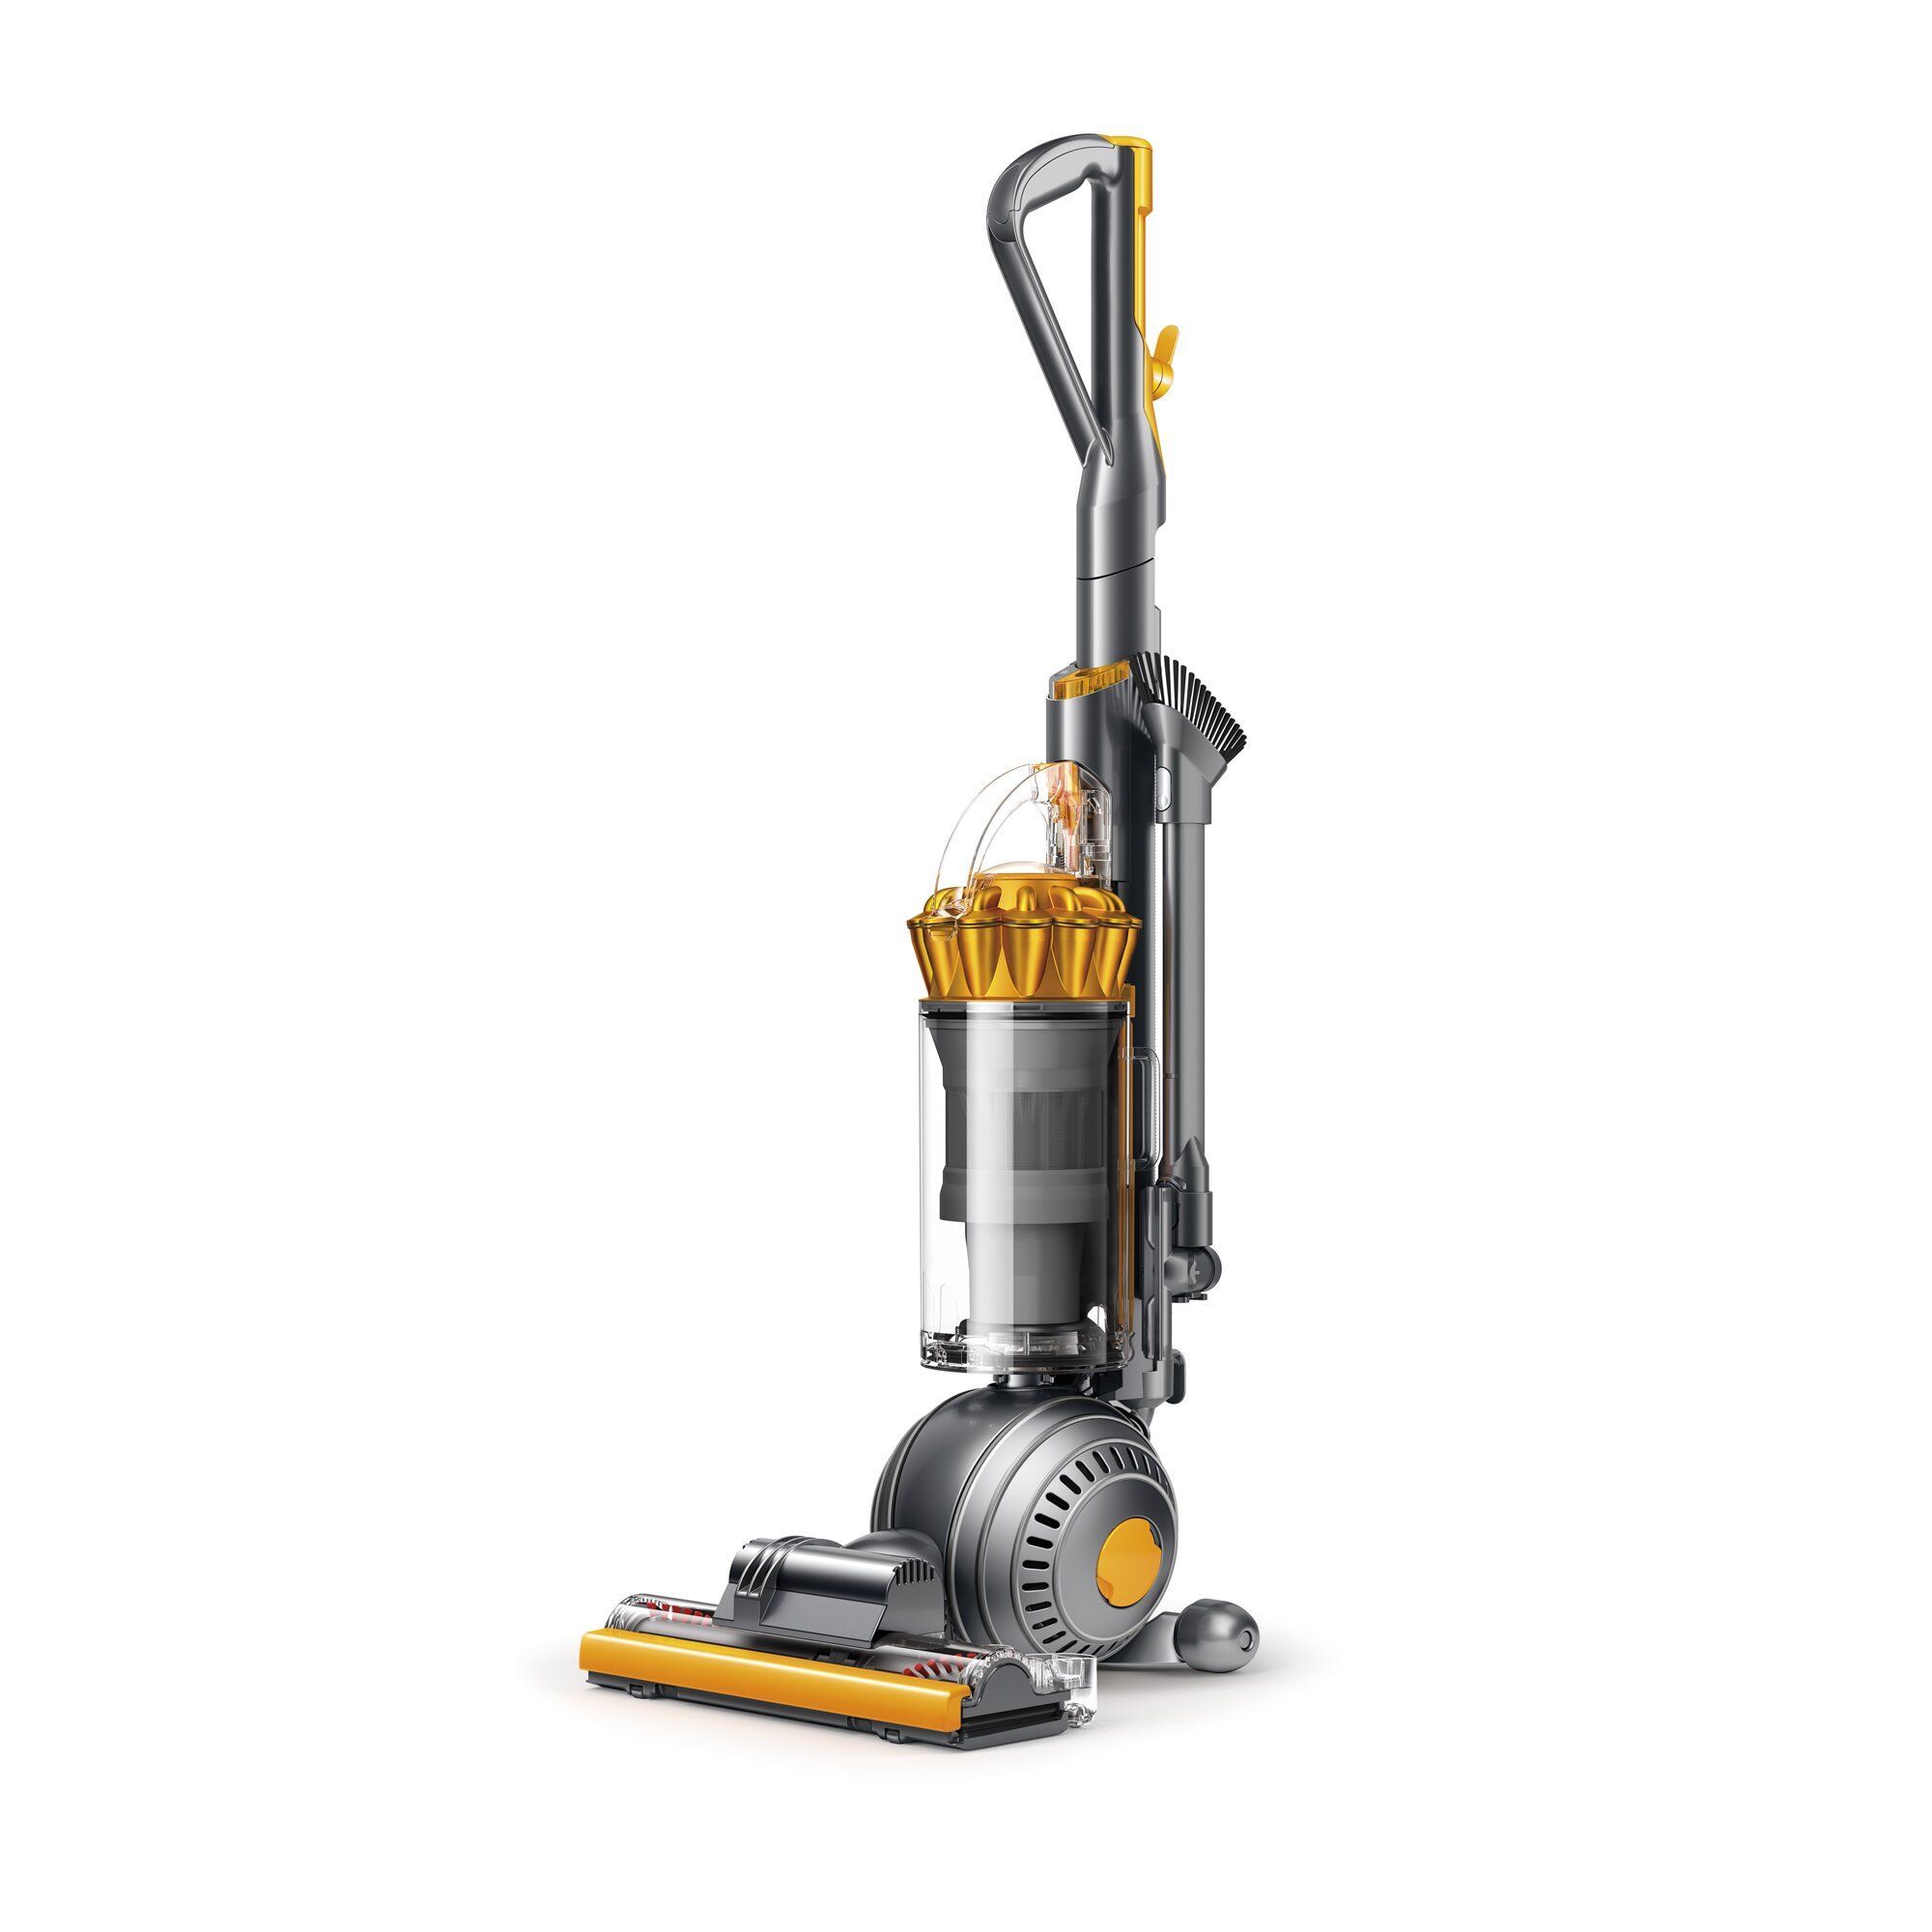 The Best 8 Dyson Vacuums In 2021, Best Dyson For Hardwood Floors